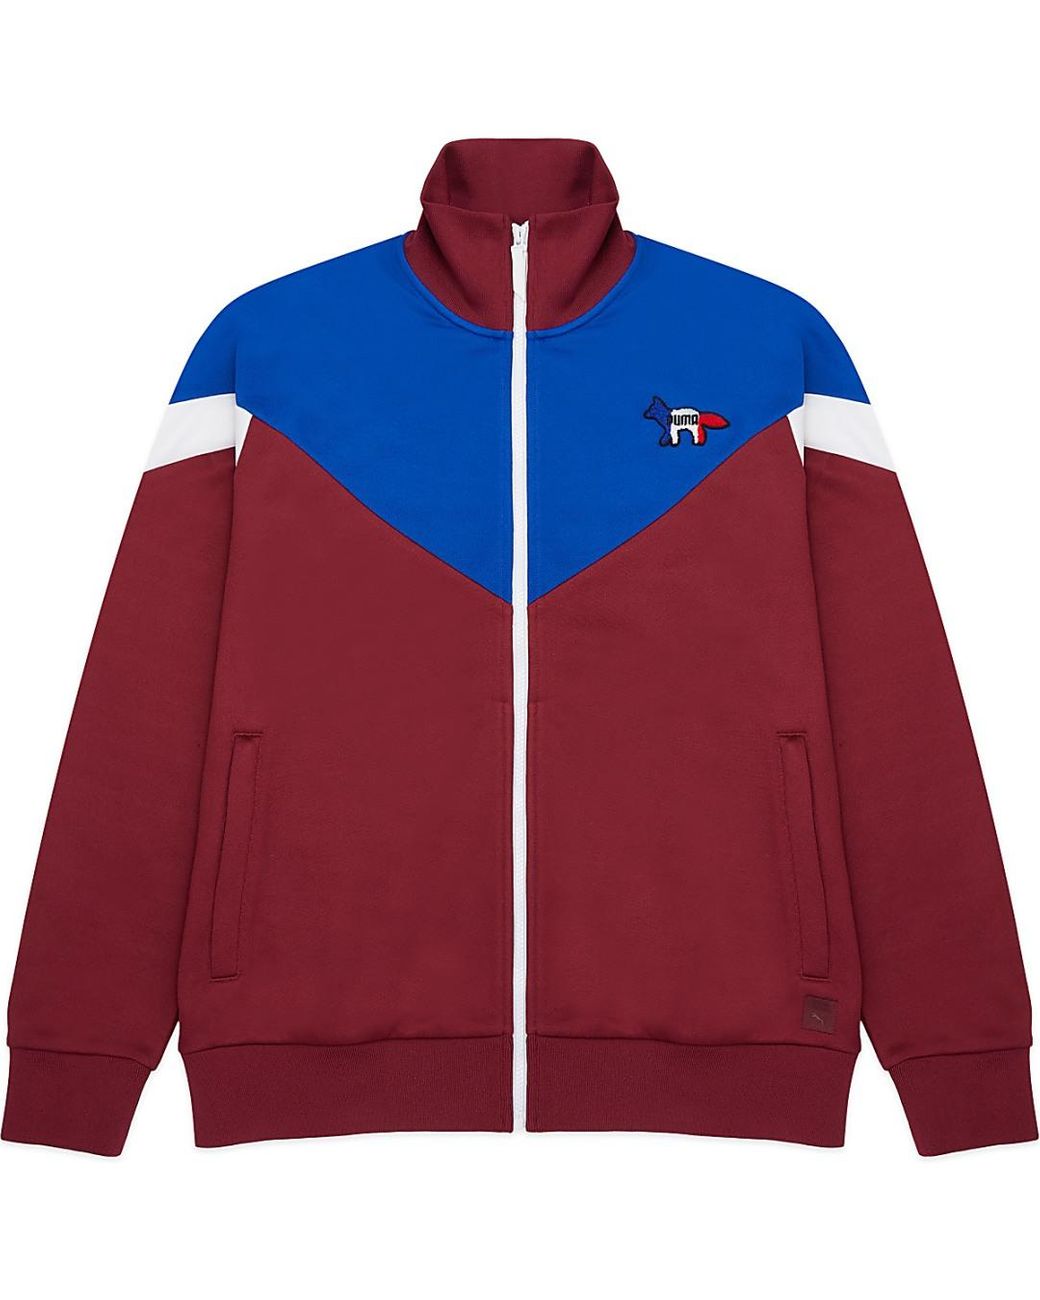 PUMA Cotton X Maison Kitsune Mcs Track Jacket in Red for Men - Lyst